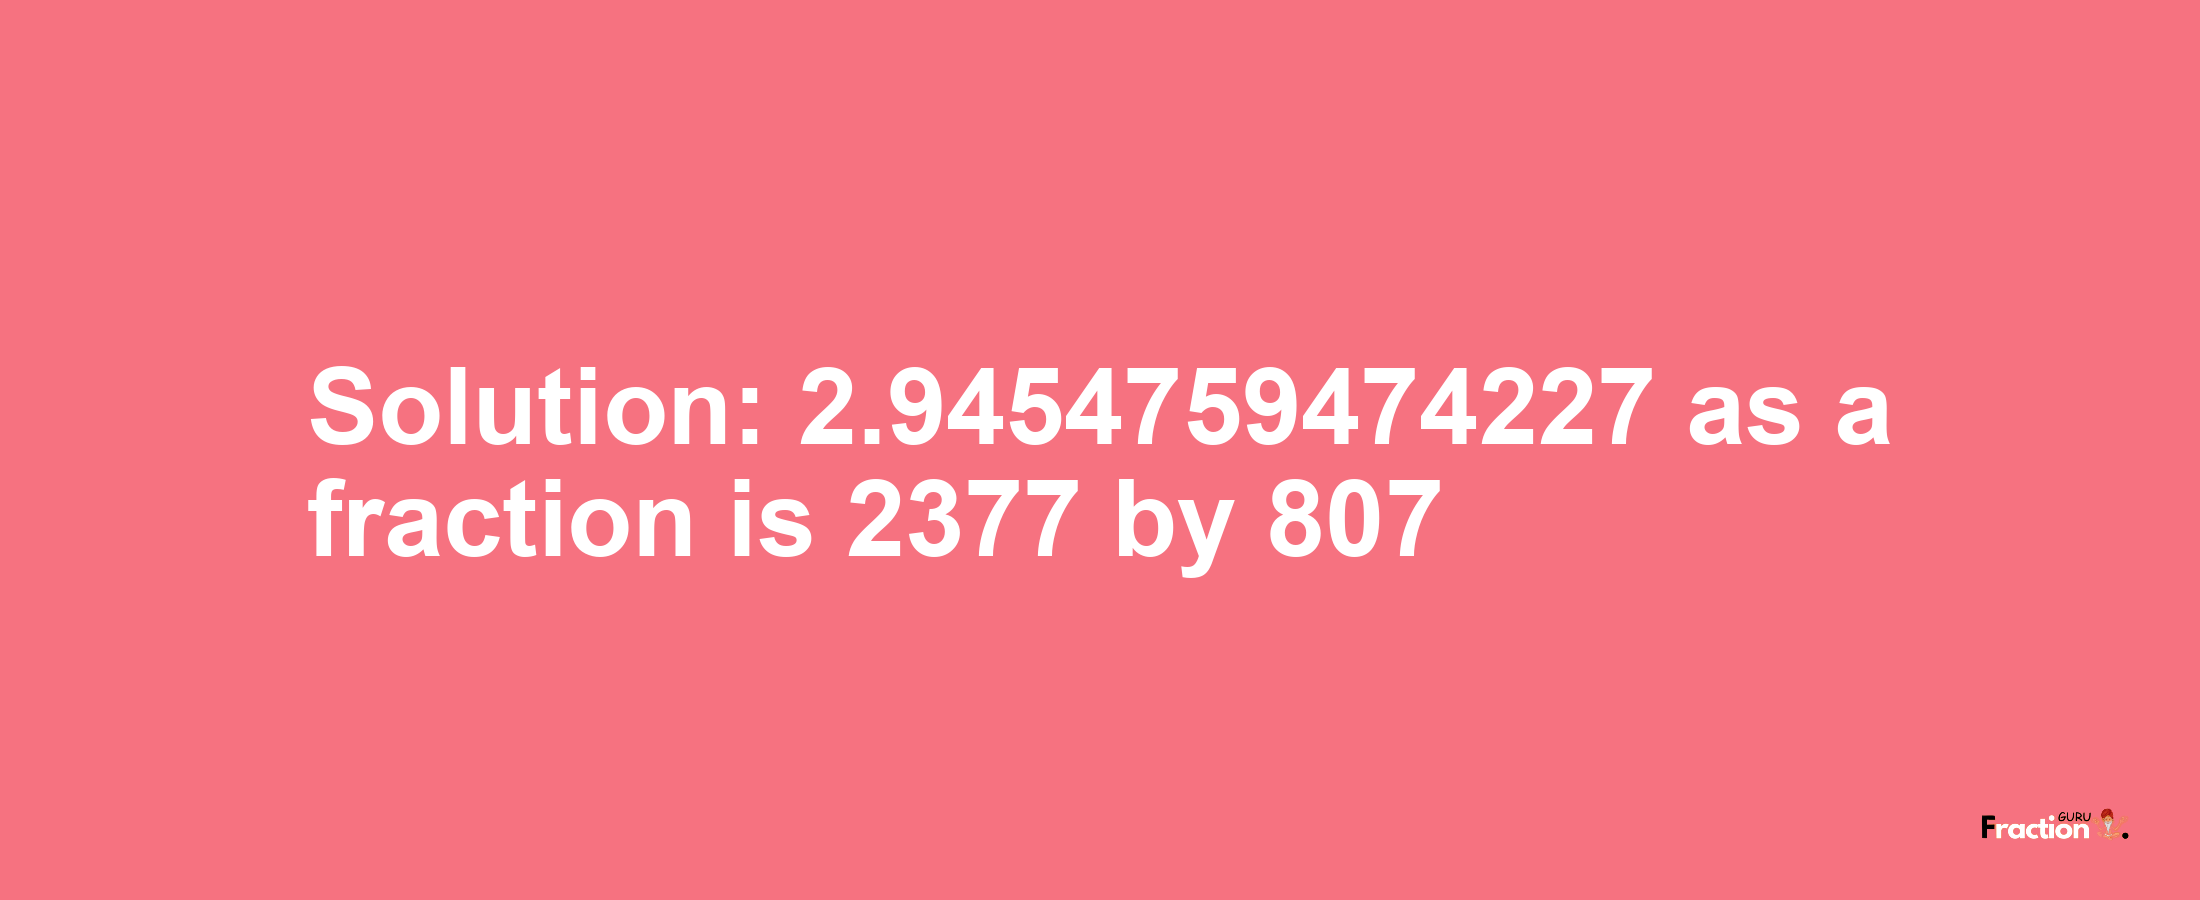 Solution:2.9454759474227 as a fraction is 2377/807